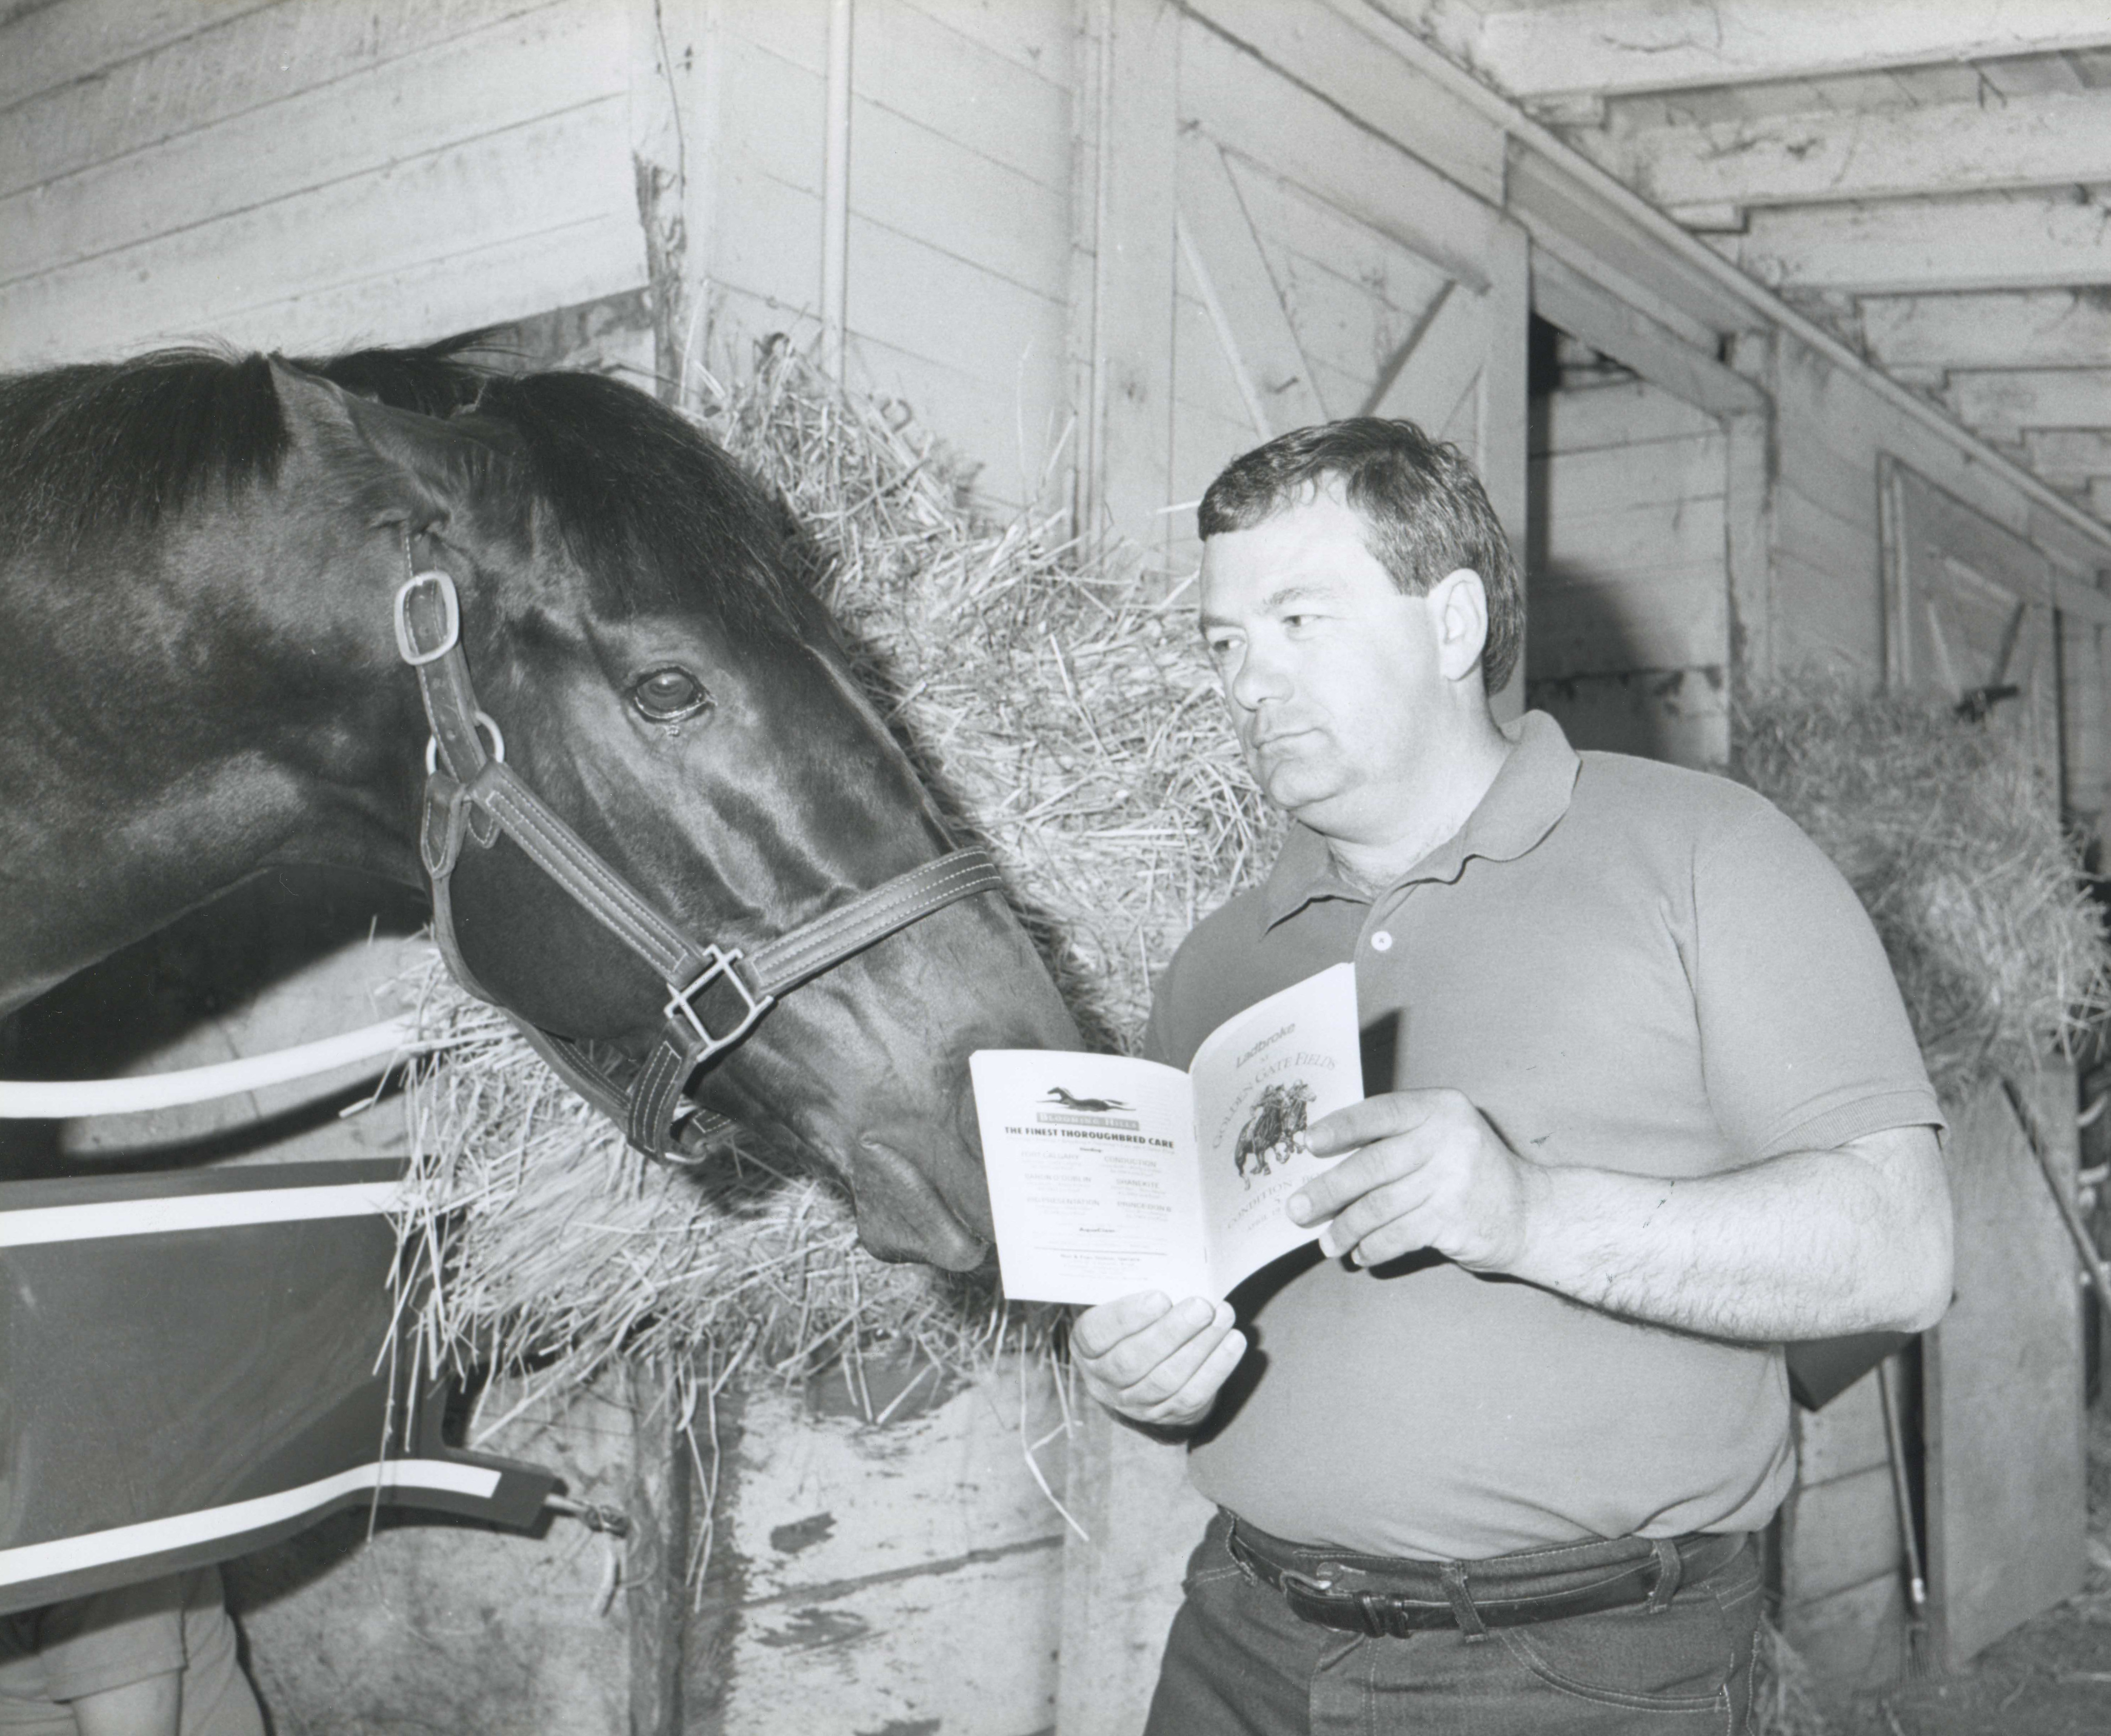 Jerry Hollendorfer with King Glorious in 1989 (Golden Gate Fields Photo/Museum Collection)